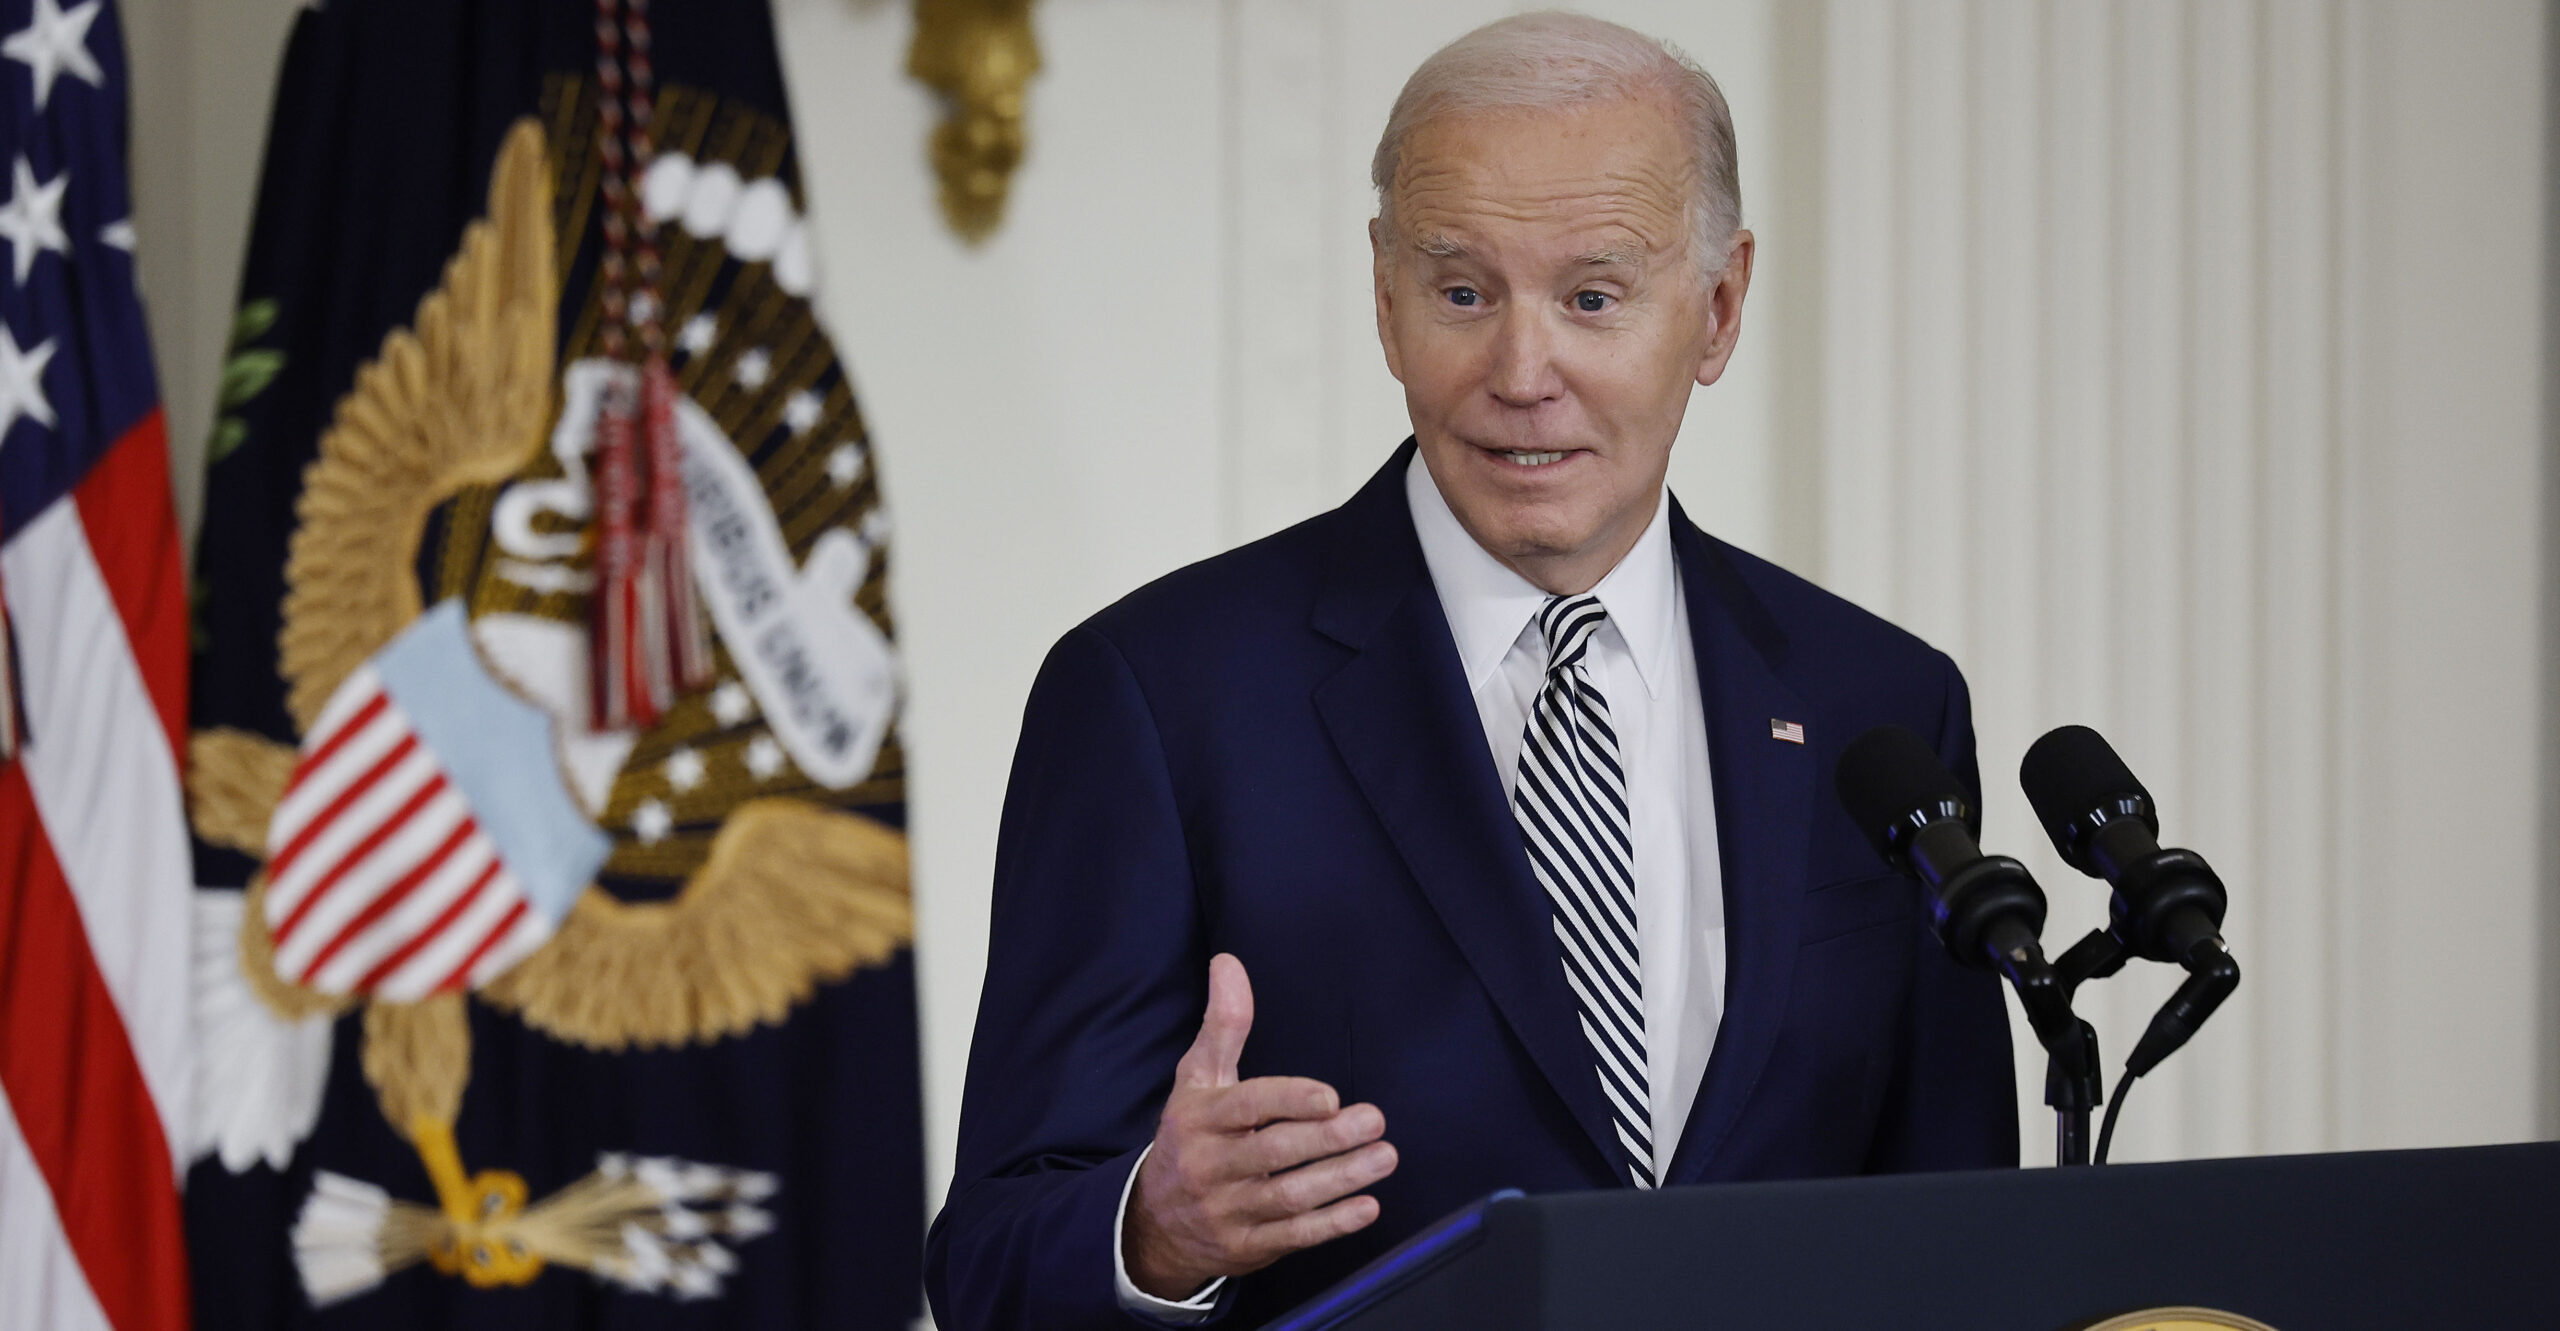 Comer Reveals How Joe Biden Received Laundered China Money - United States  House Committee on Oversight and Accountability